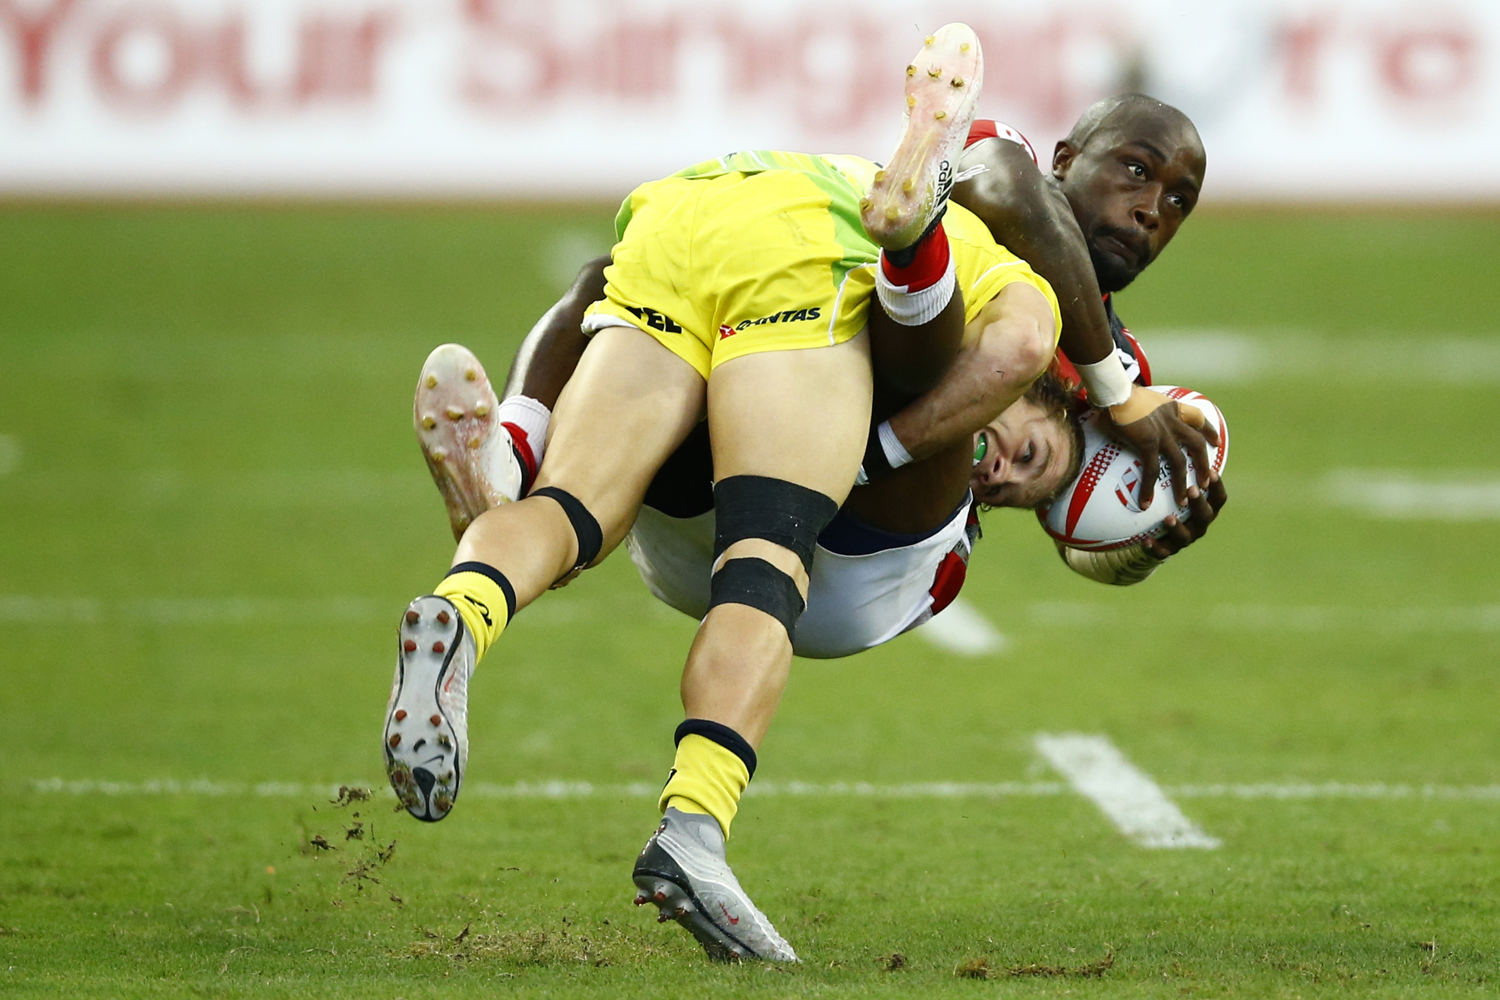  Rugby Union - Singapore Sevens - National Stadium, Singapore, 15/04/17 - Kenya's Frank Wanyama is tackled by Australia's Tom Lucas. REUTERS/Yong Teck Lim 